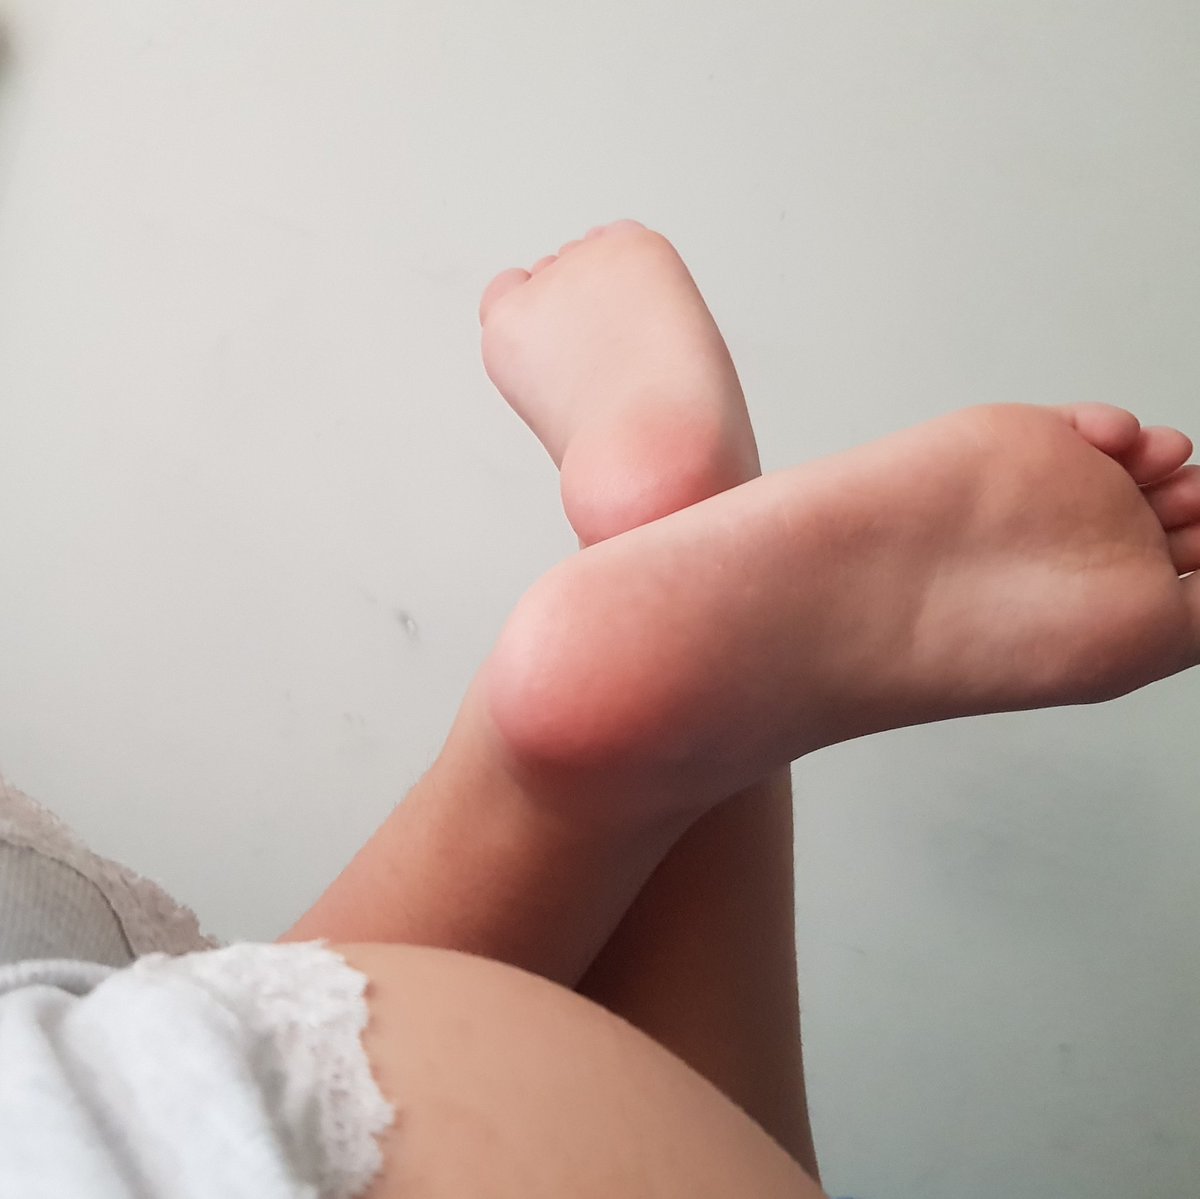 For onlyfans feet an starting Staying Anonymous